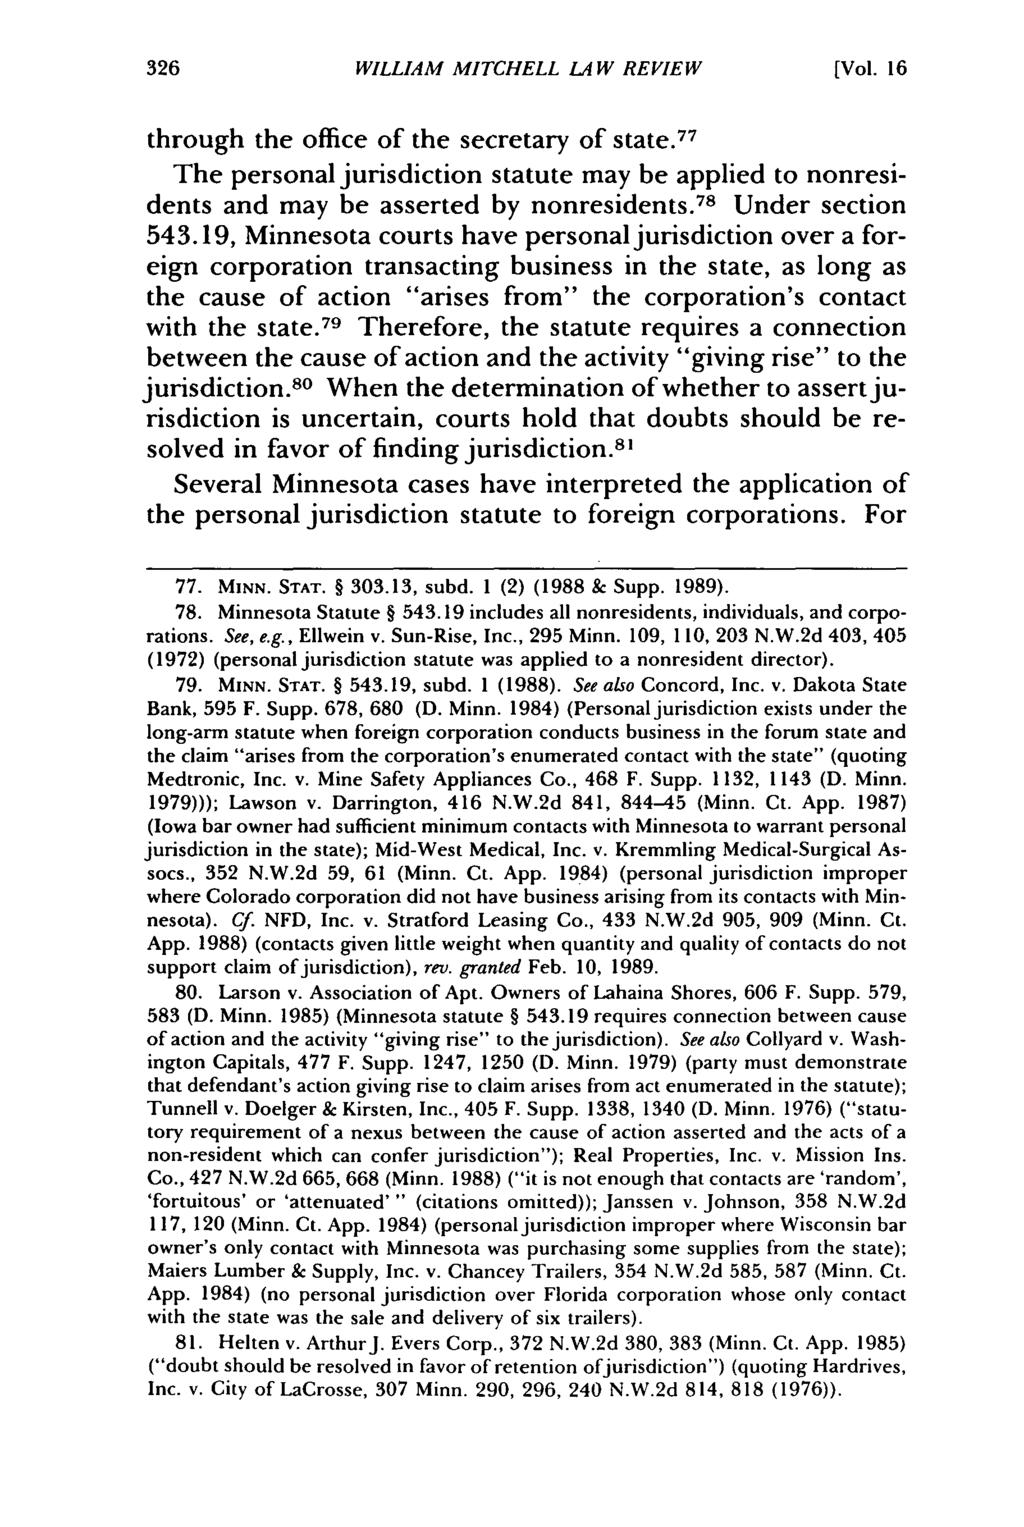 William Mitchell Law Review, Vol. 16, Iss. 1 [1990], Art. 7 WILLIAM MITCHELL LAW REVIEW [Vol. 16 through the office of the secretary of state.